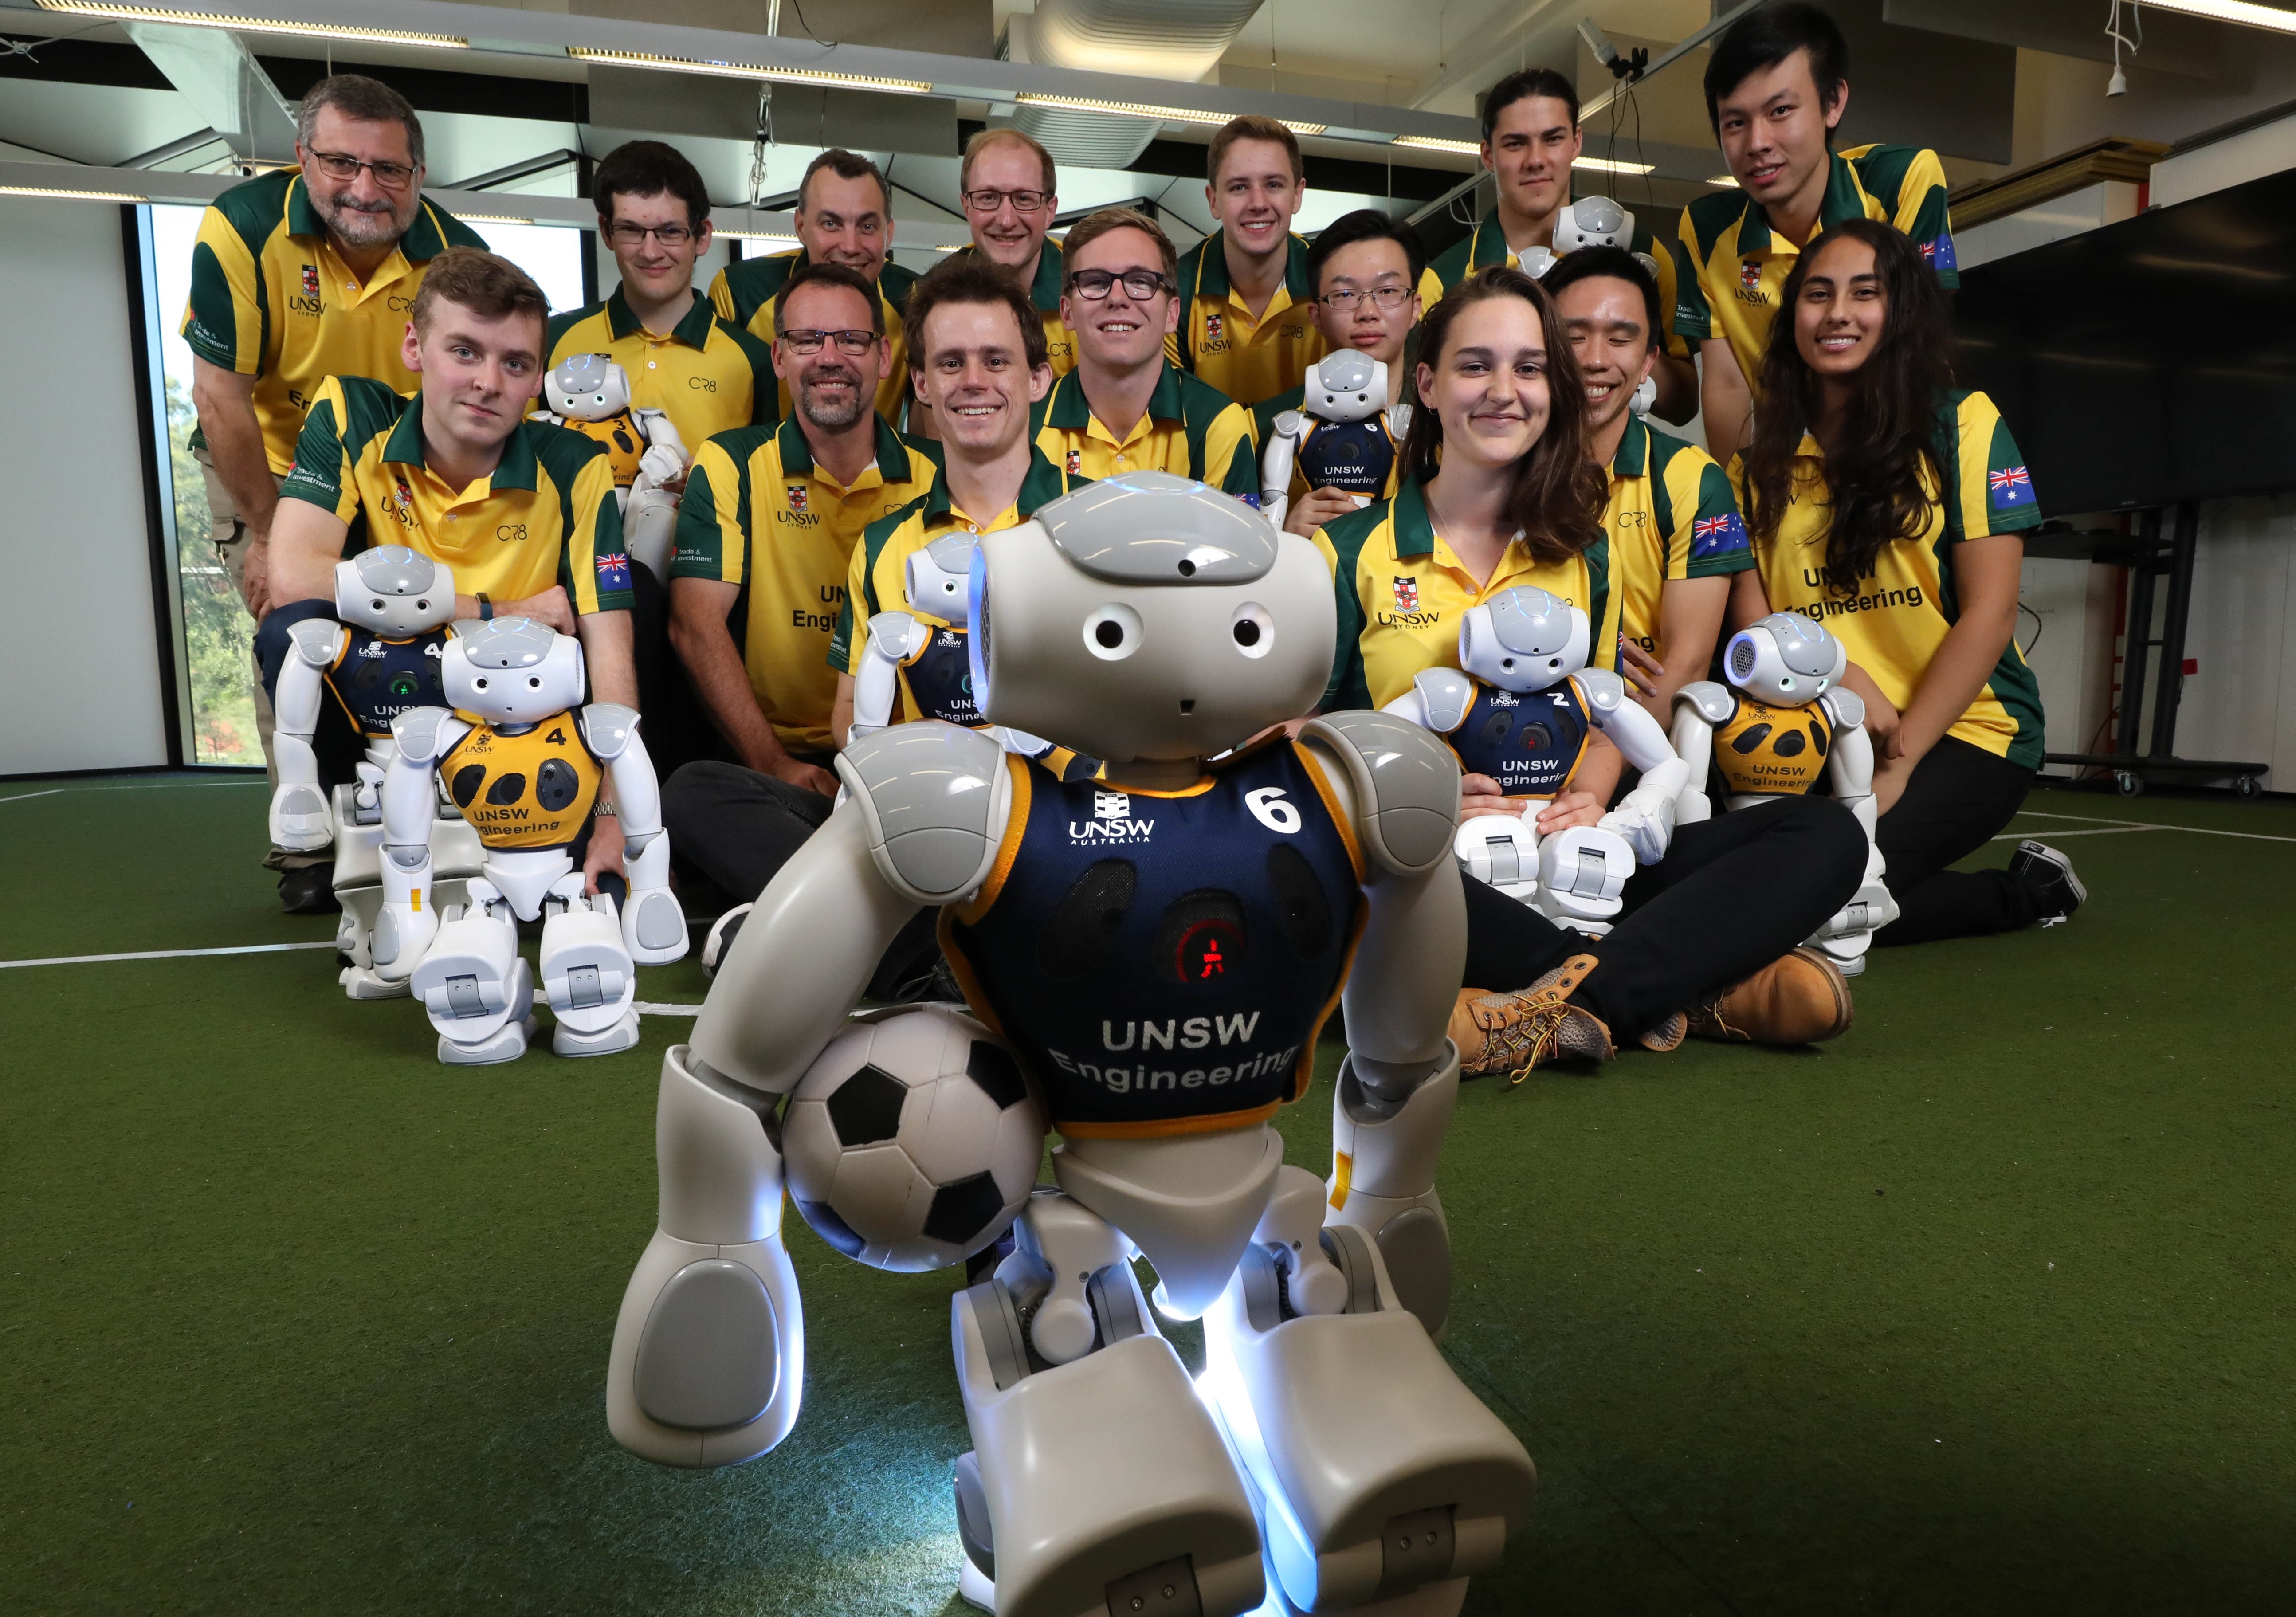 The UNSW RoboCup team, both the Runswift soccer team and the @Home domestic assistant team, who will do battle at the 2017 RoboCup World Championships in Japan next week.